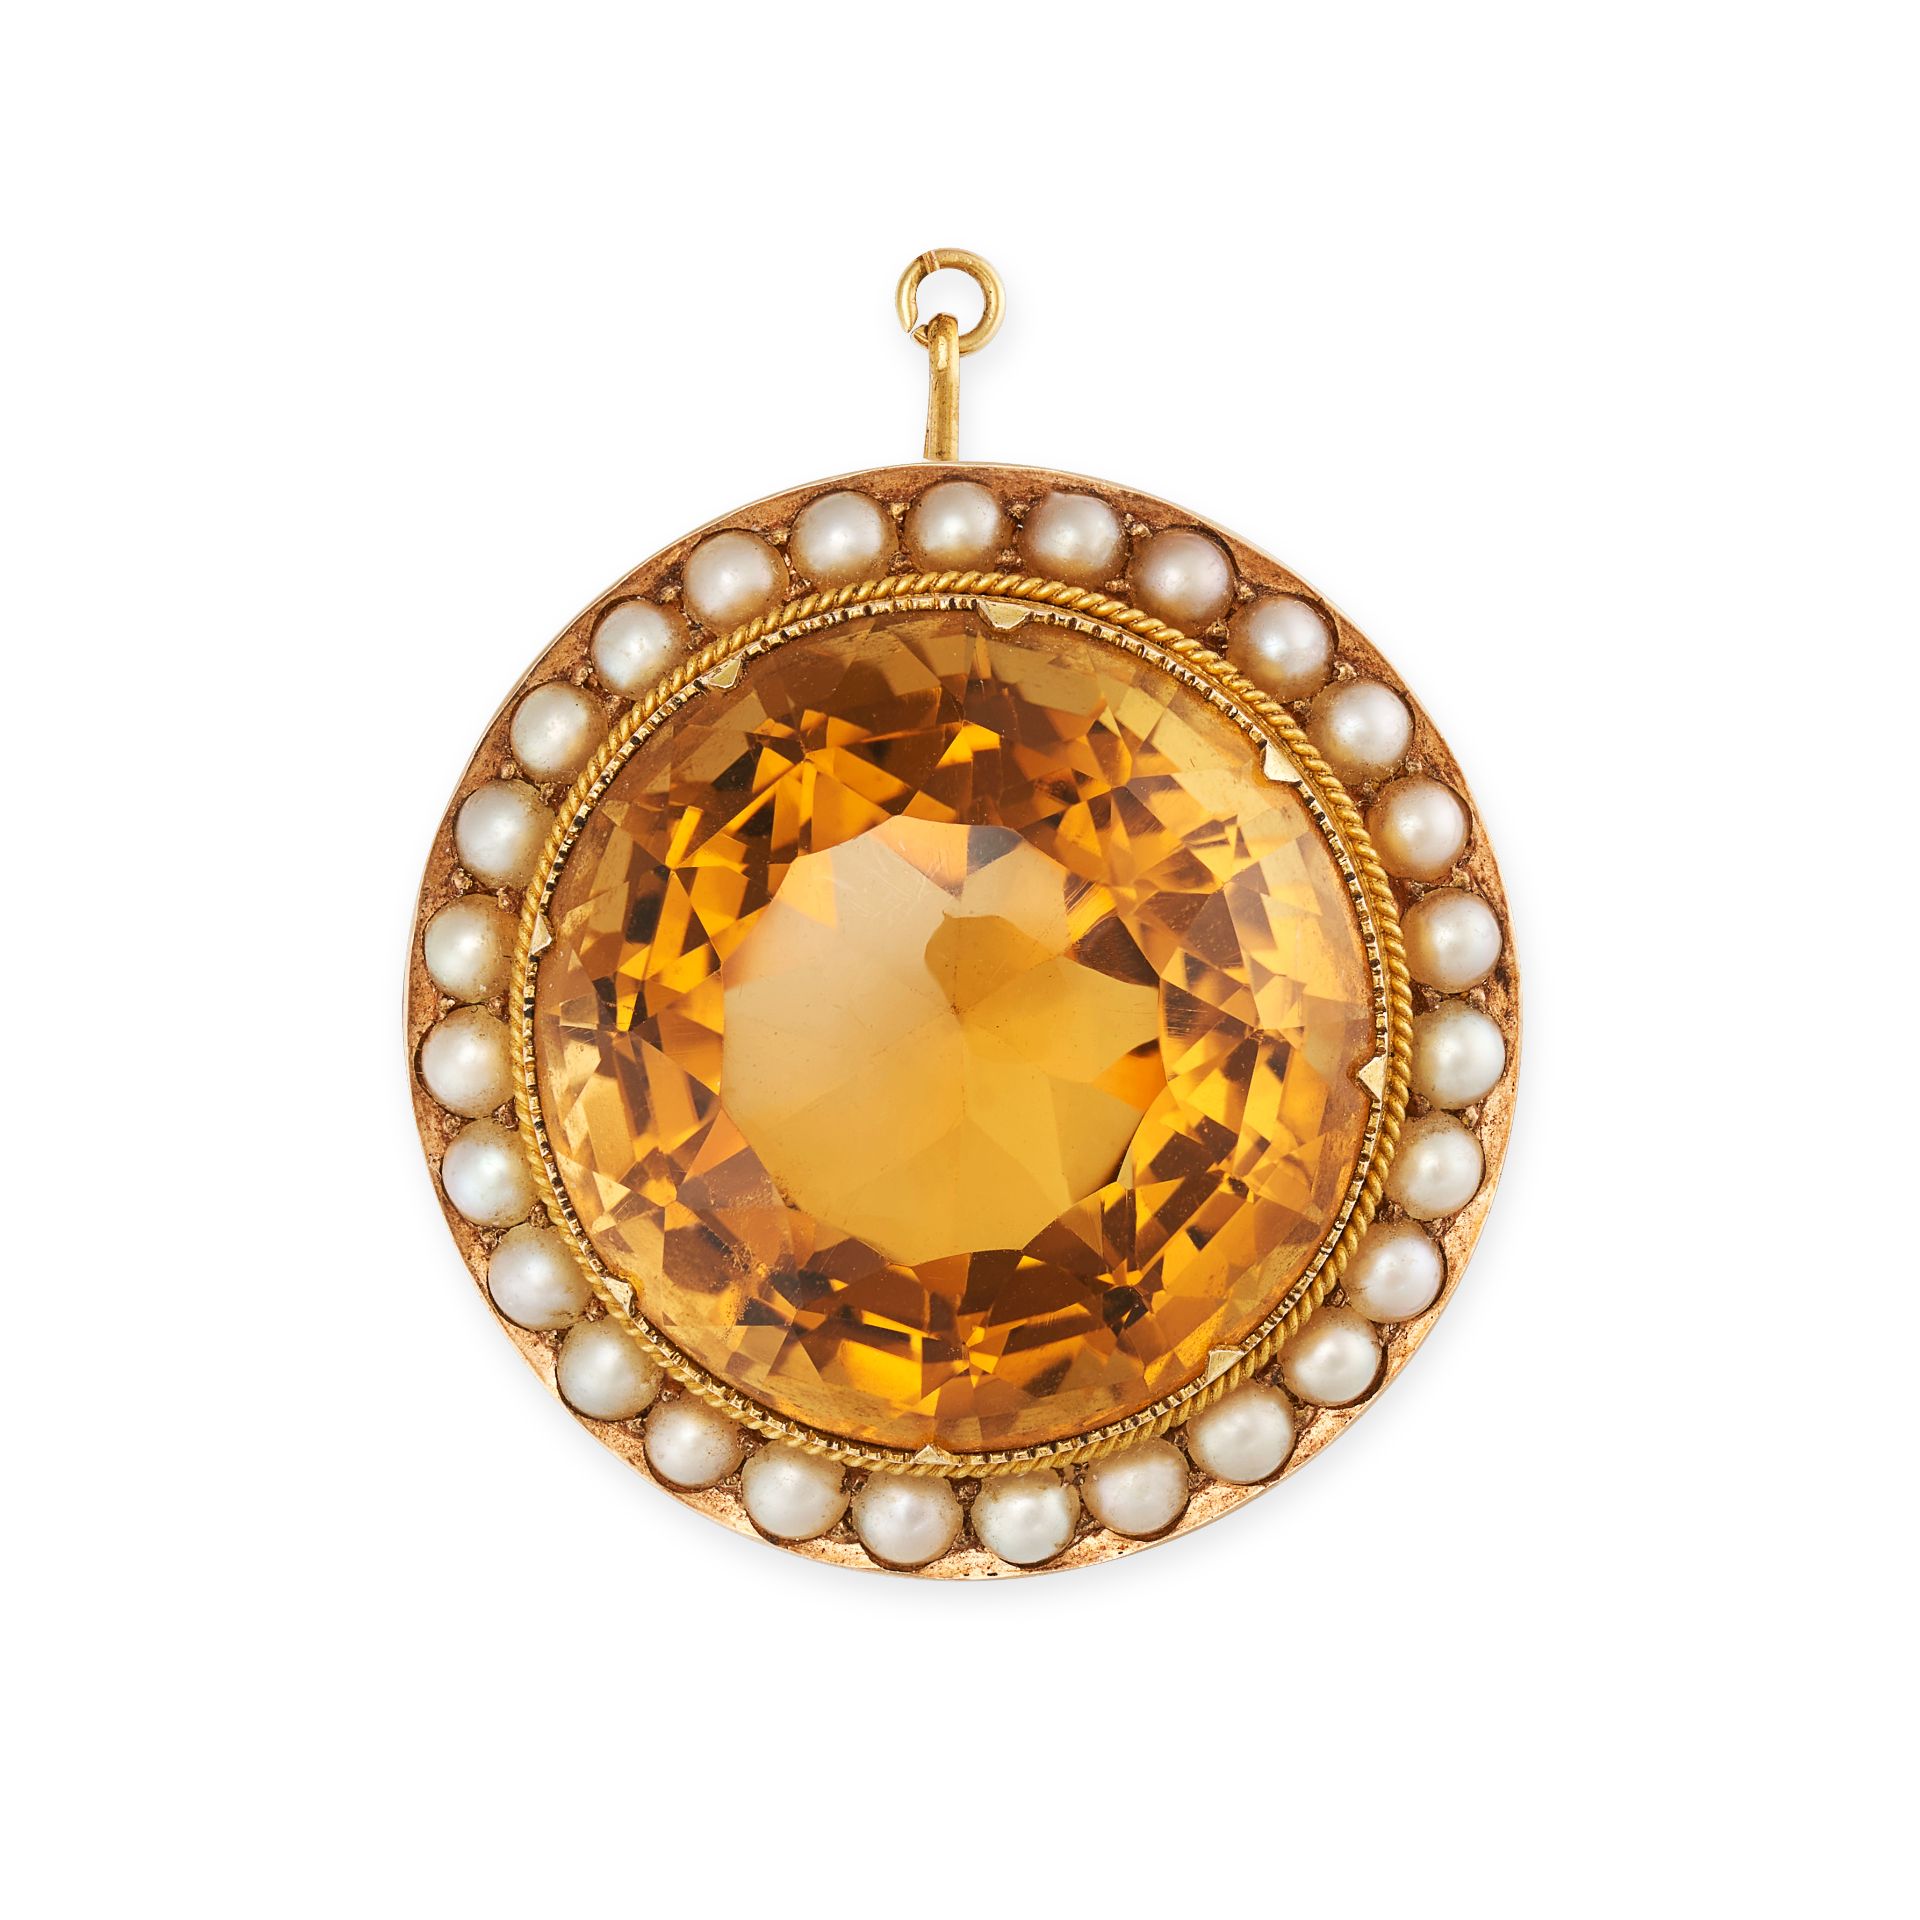 NO RESERVE - AN ANTIQUE CITRINE AND PEARL CLUSTER BROOCH in yellow gold, set with a round cut cit...